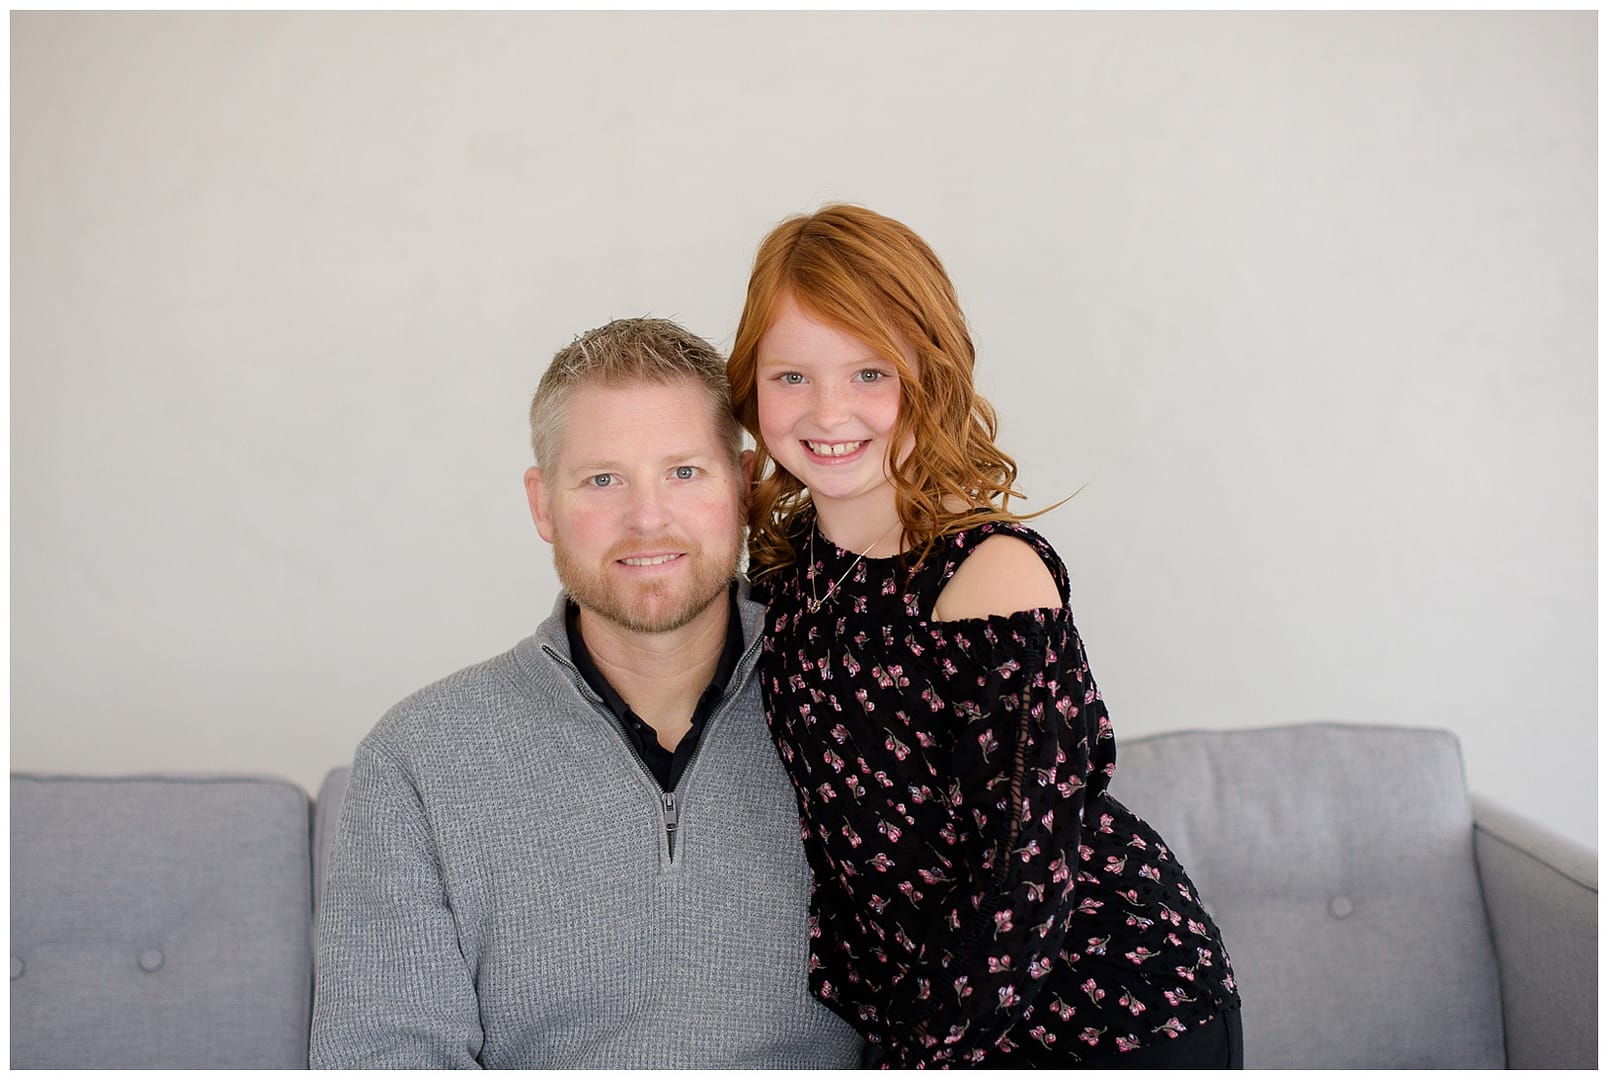 Dad & daughter pose for portrait. Photos by Tiffany Hix Photography.